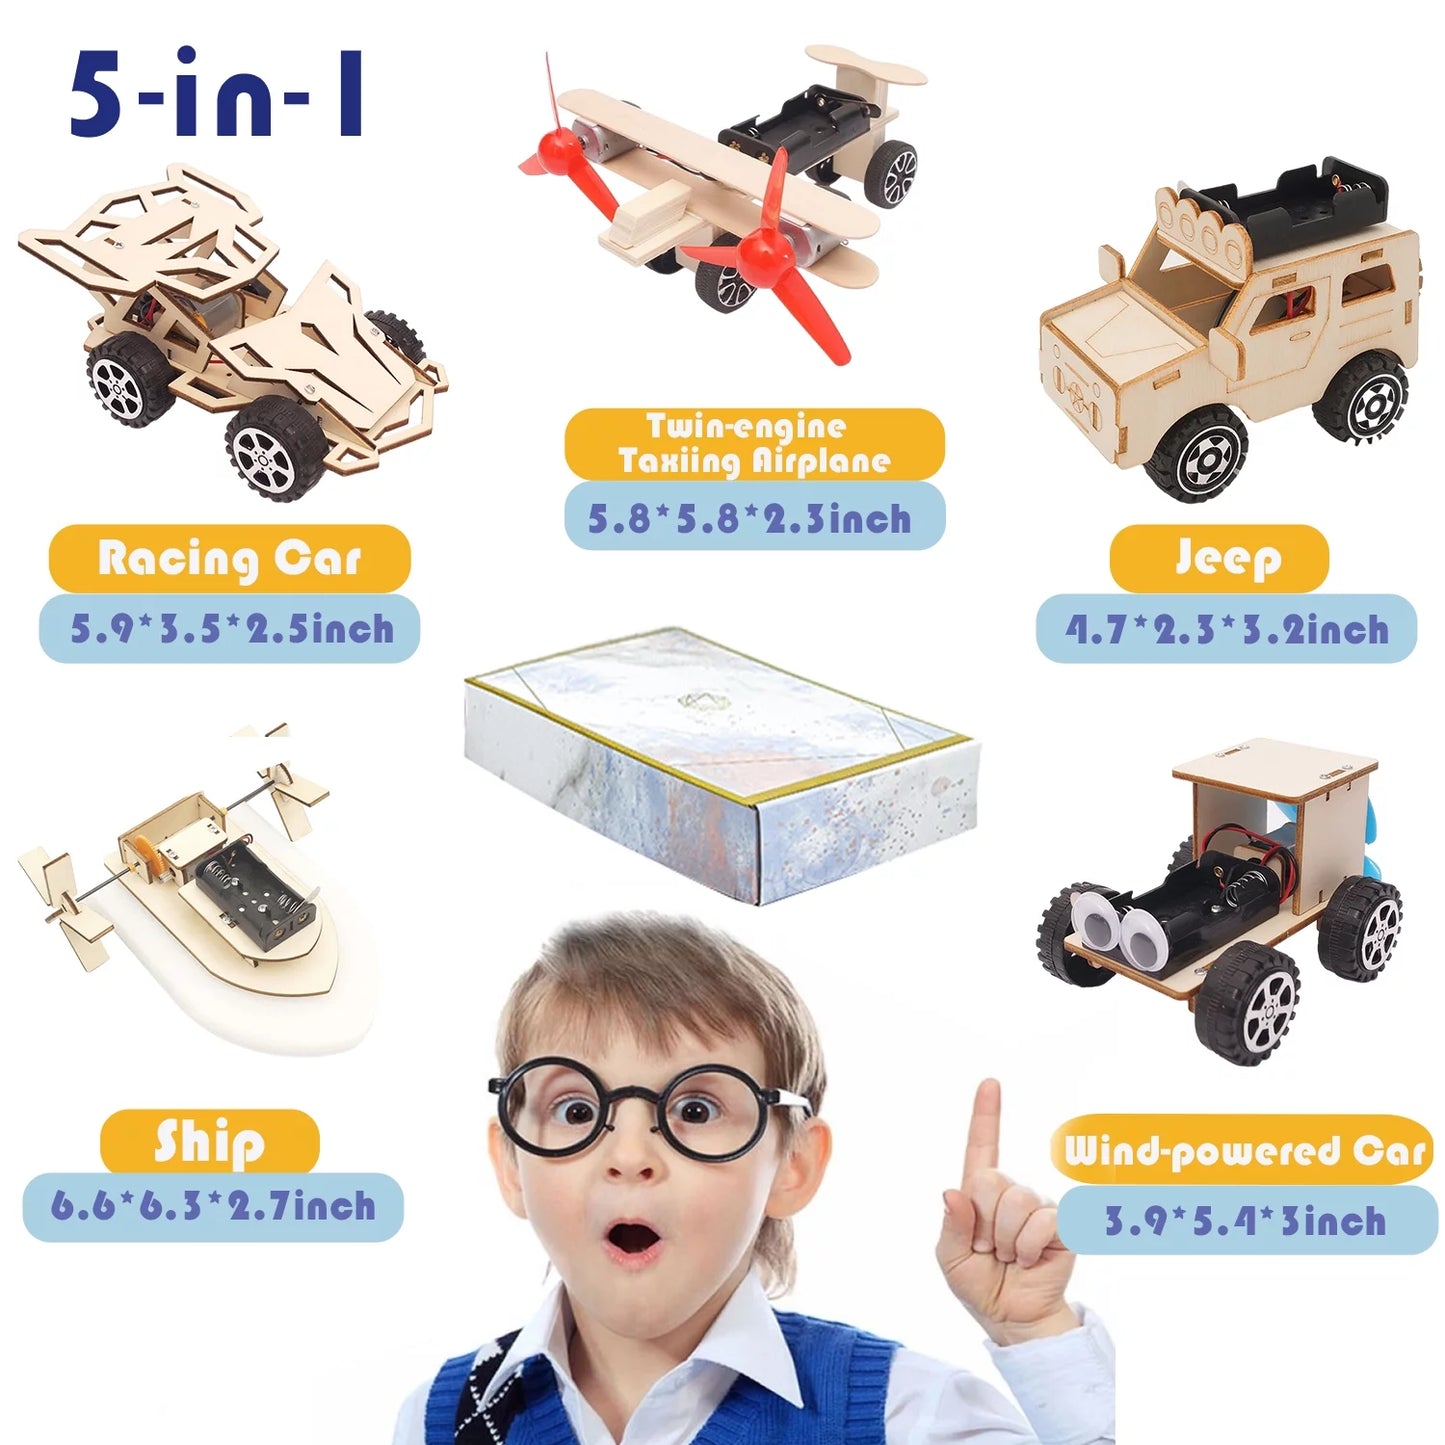 5 in 1 STEM Building Kits for Kids, Wooden Car Model Kit for Kids, DIY 3D Wood Puzzles Craft Projects Set, Gift Toys for Ages 6-12 Boys Girls